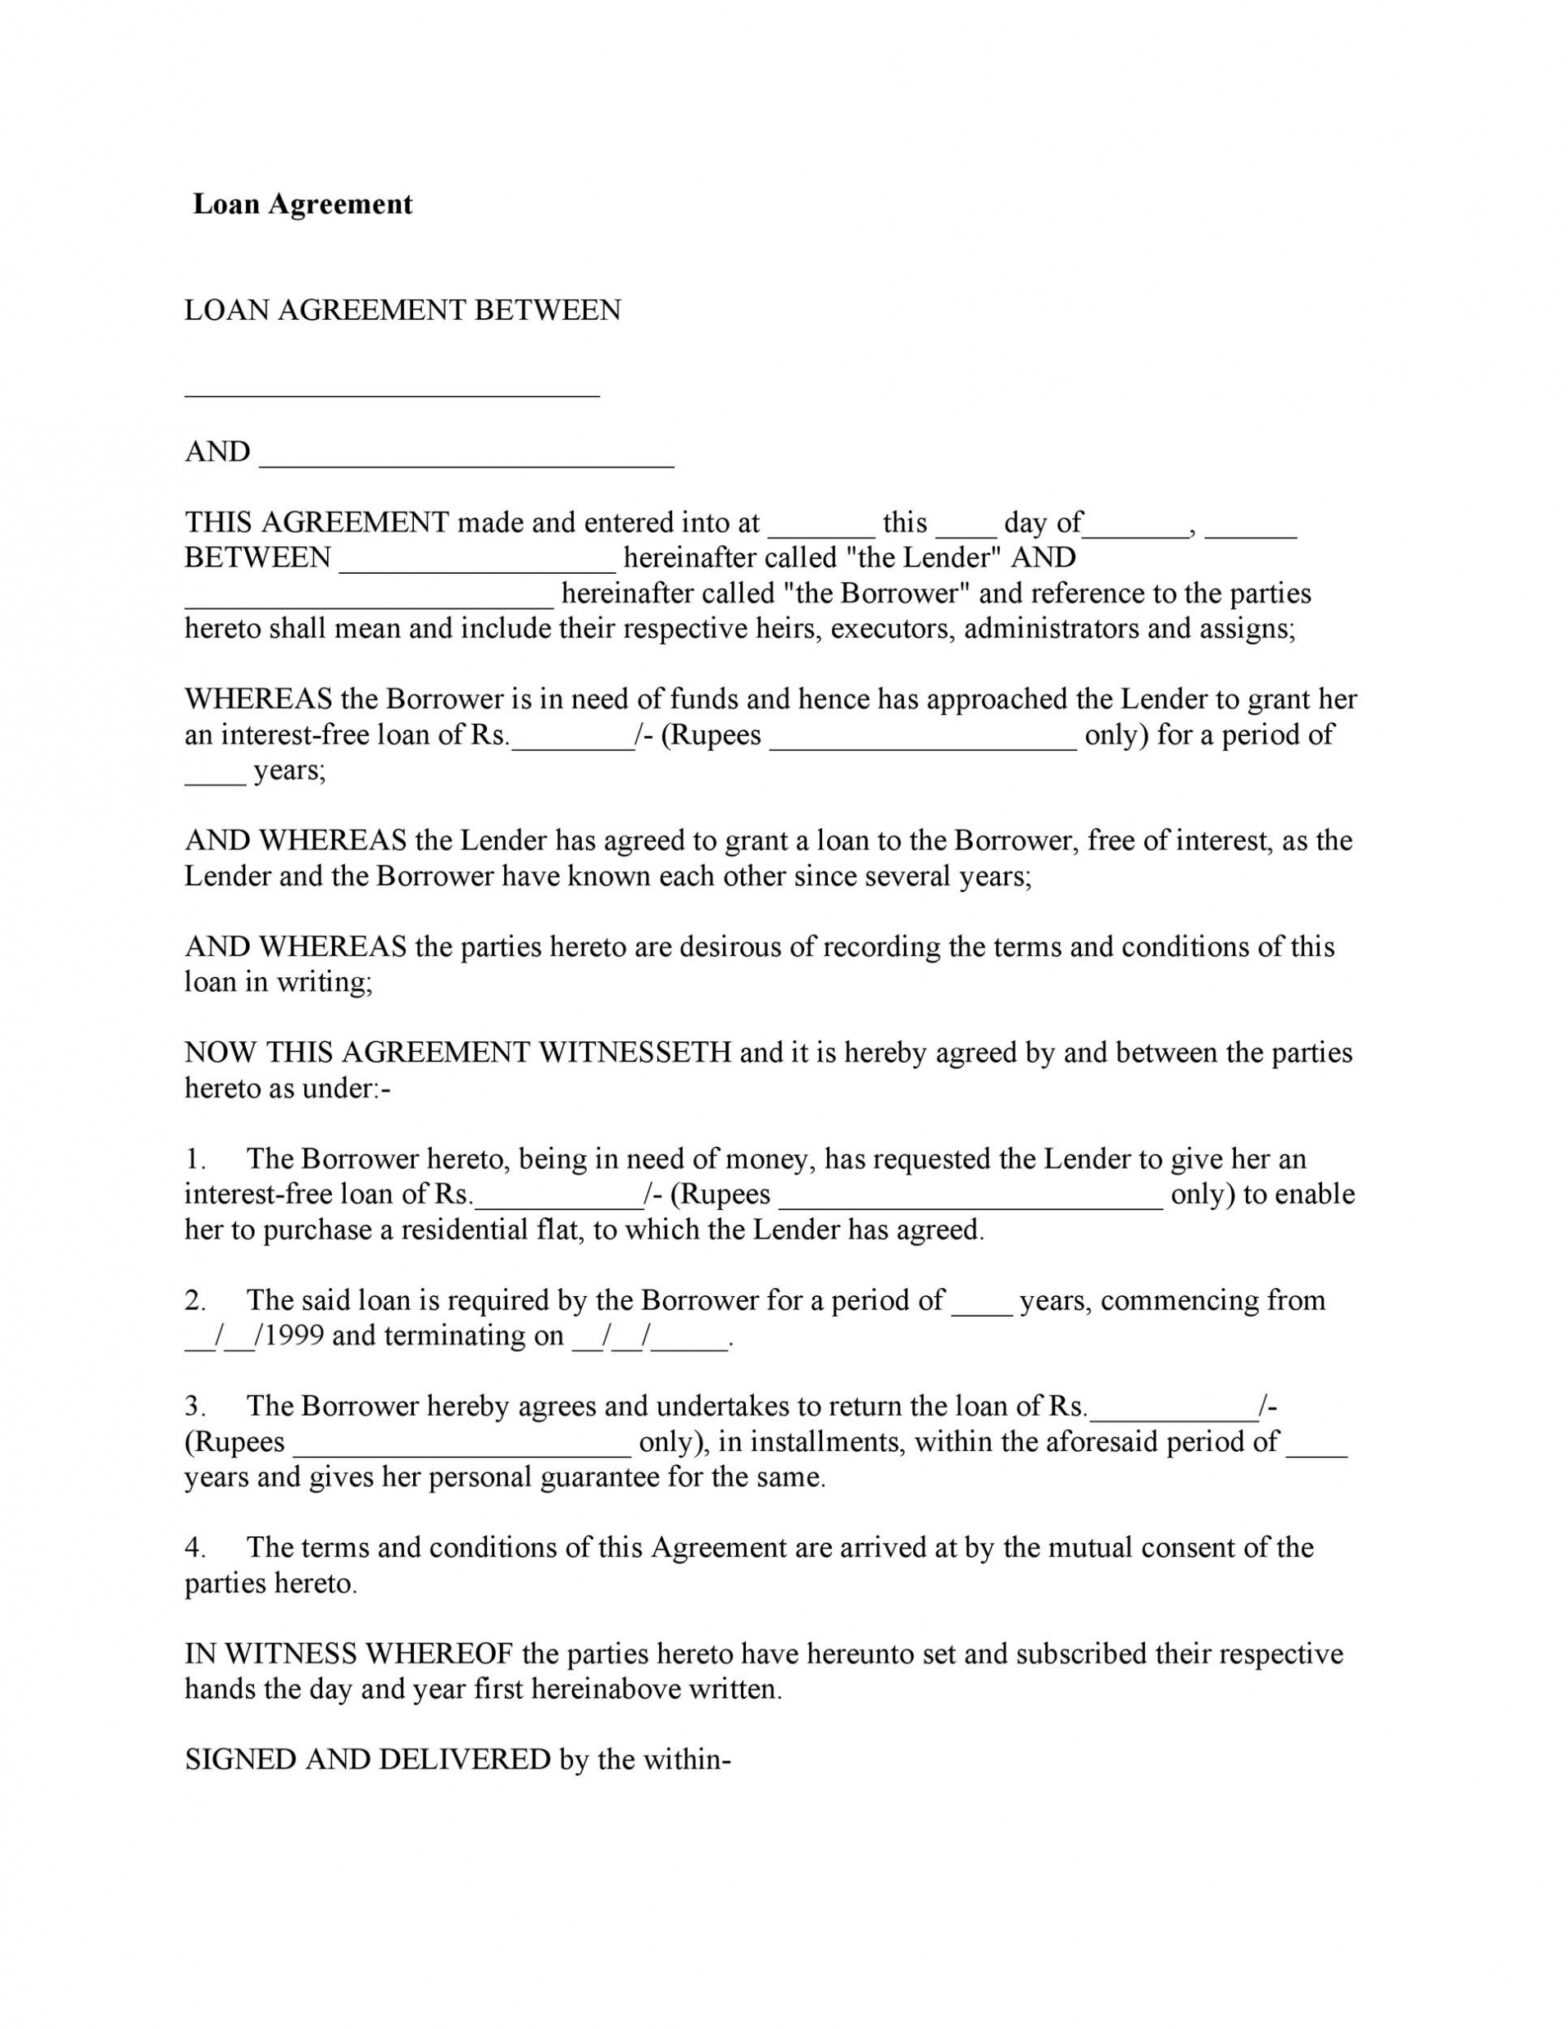 40+ Free Loan Agreement Templates [Word &amp; Pdf] ᐅ Templatelab in Free Installment Loan Agreement Template